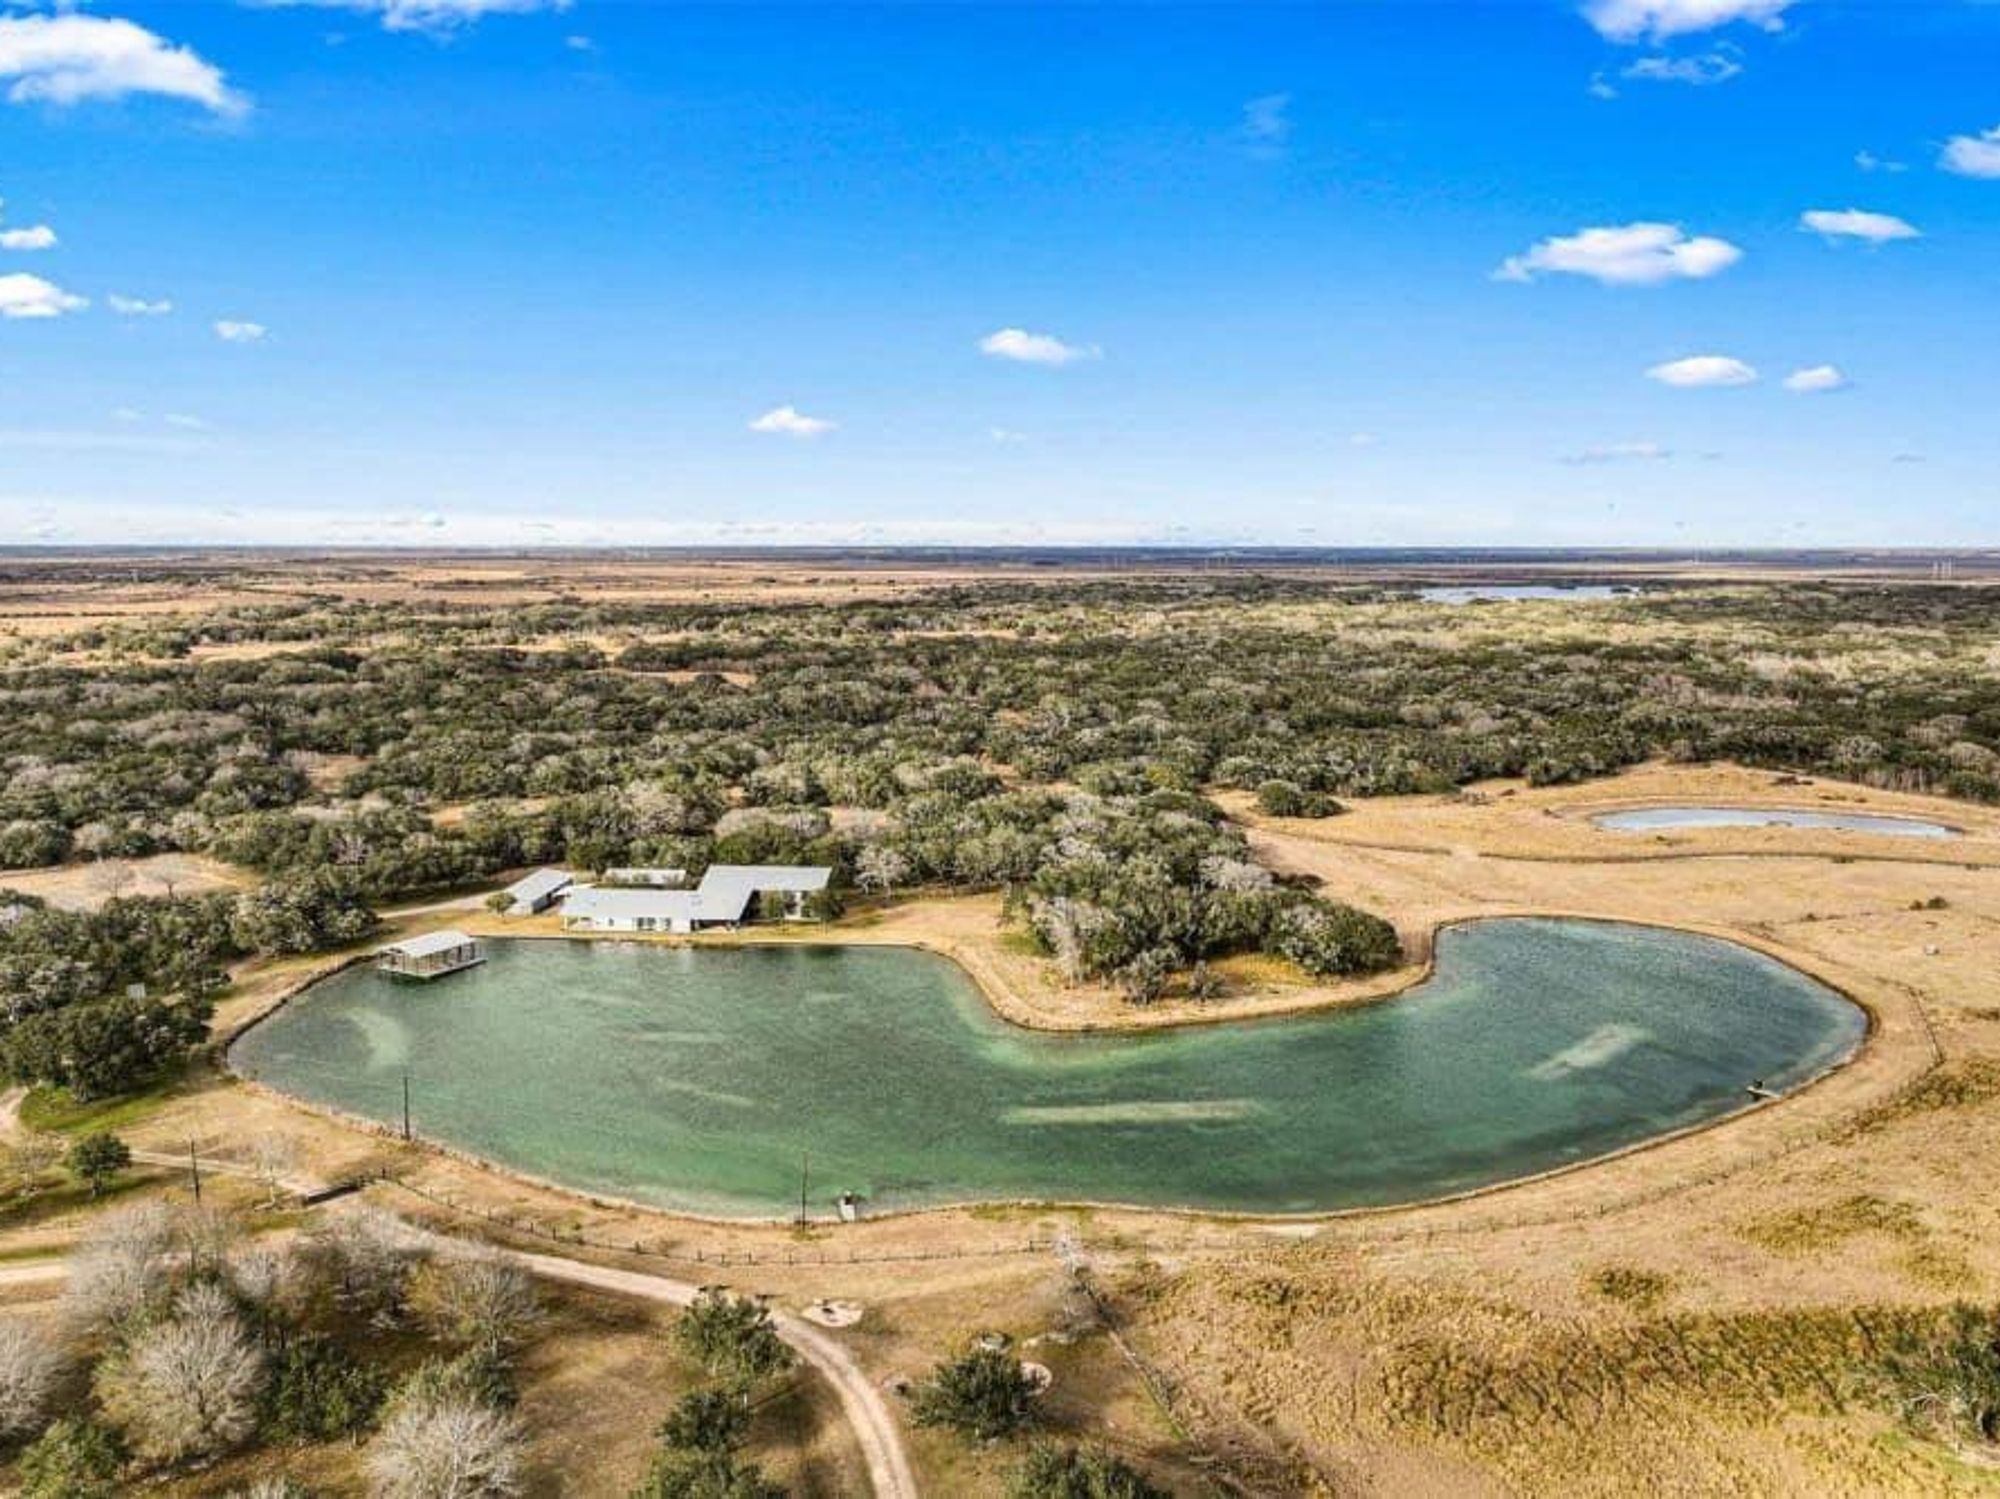 A record-setting 846,347 acres of Texas land changed hands in 2021.